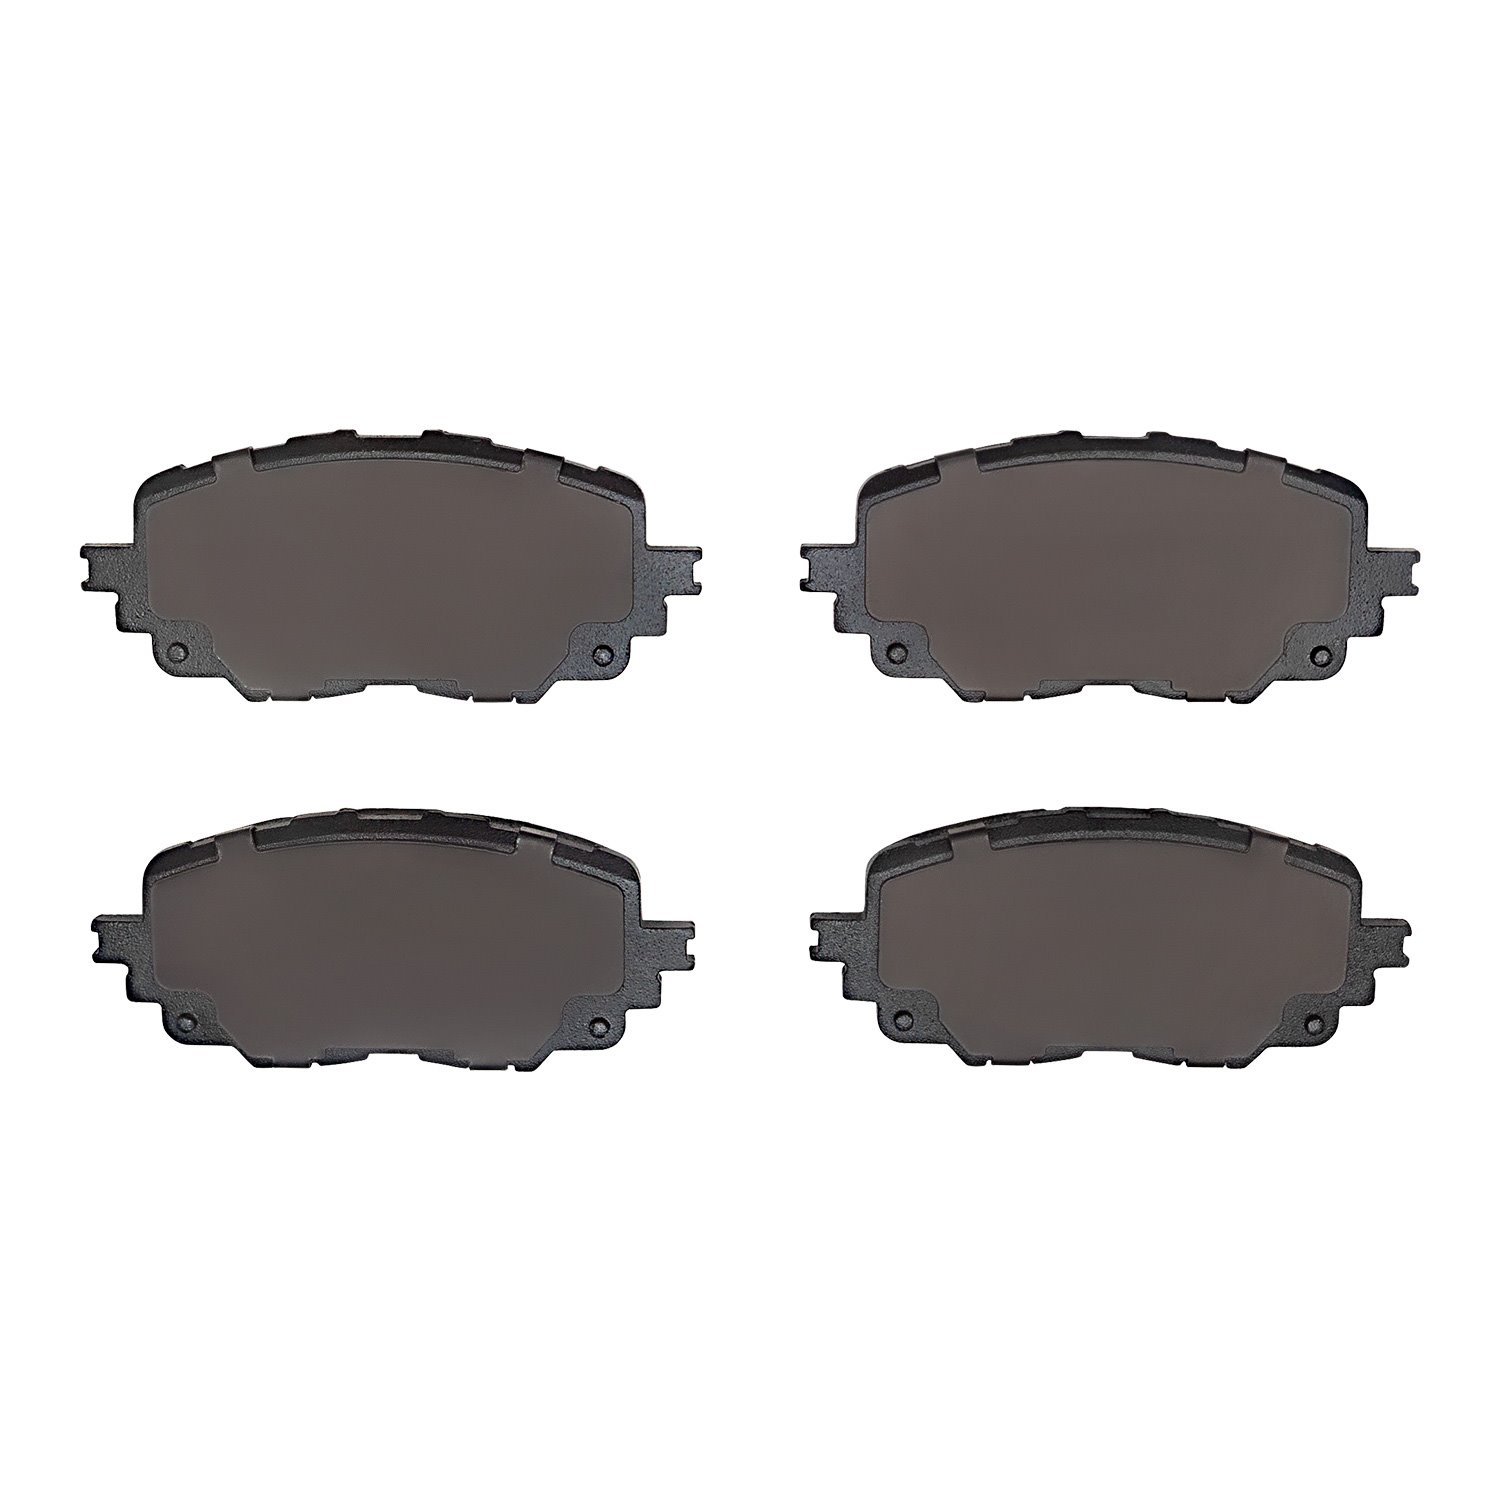 1000-1903-00 Track/Street Low-Metallic Brake Pads Kit, Fits Select Multiple Makes/Models, Position: Front